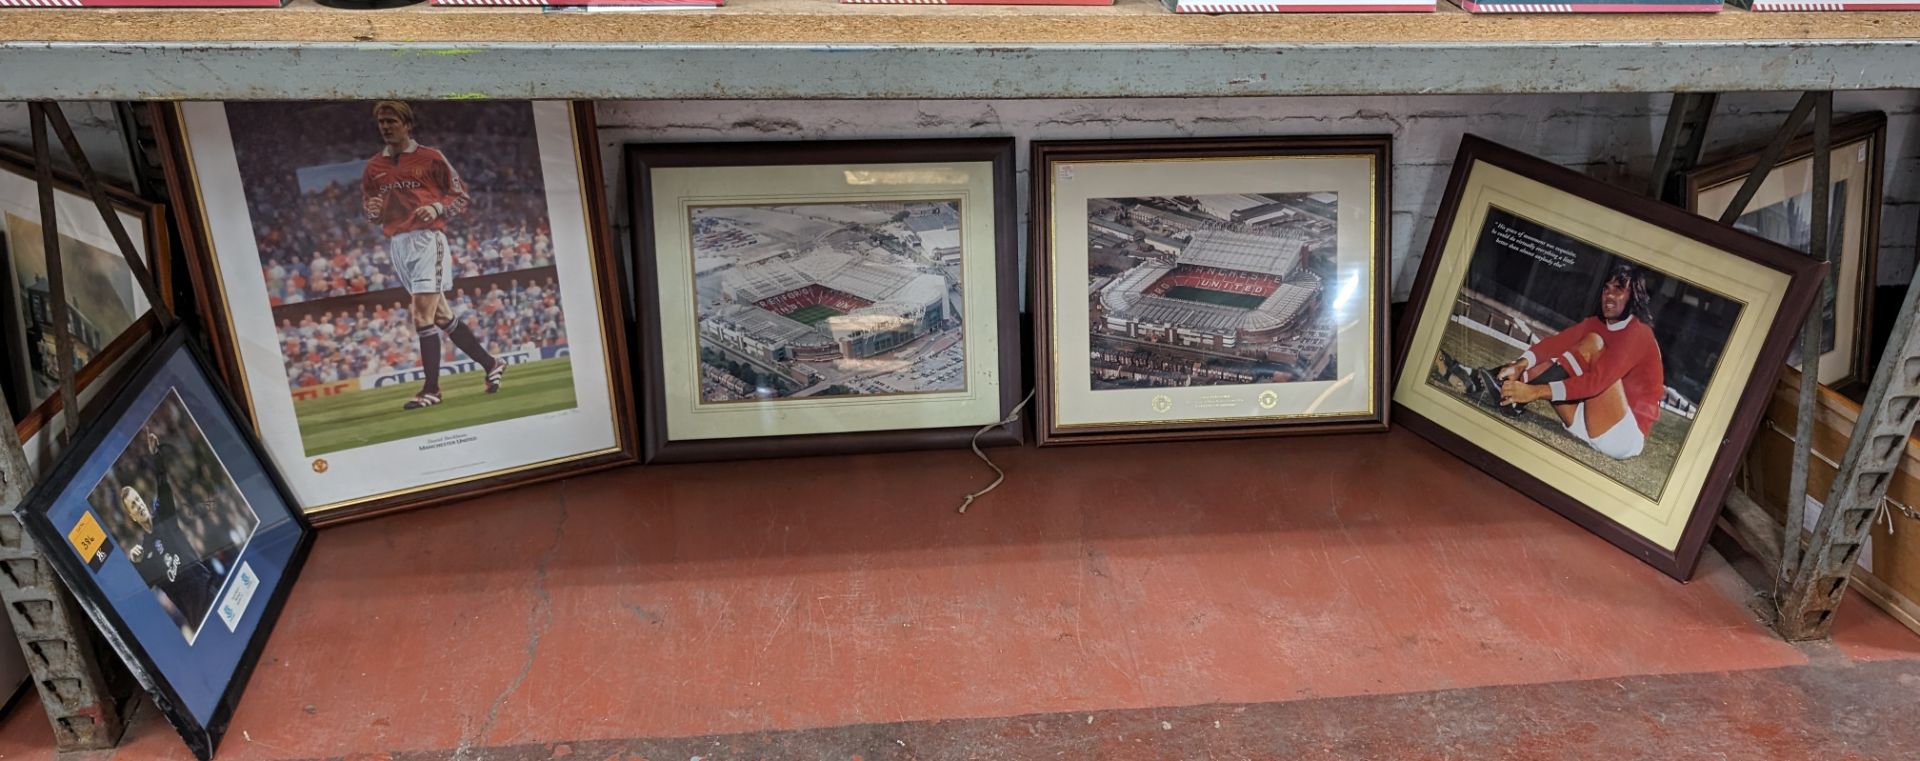 5 off football related framed photos, comprising 4 photographs relating to Manchester Utd & 1 relati